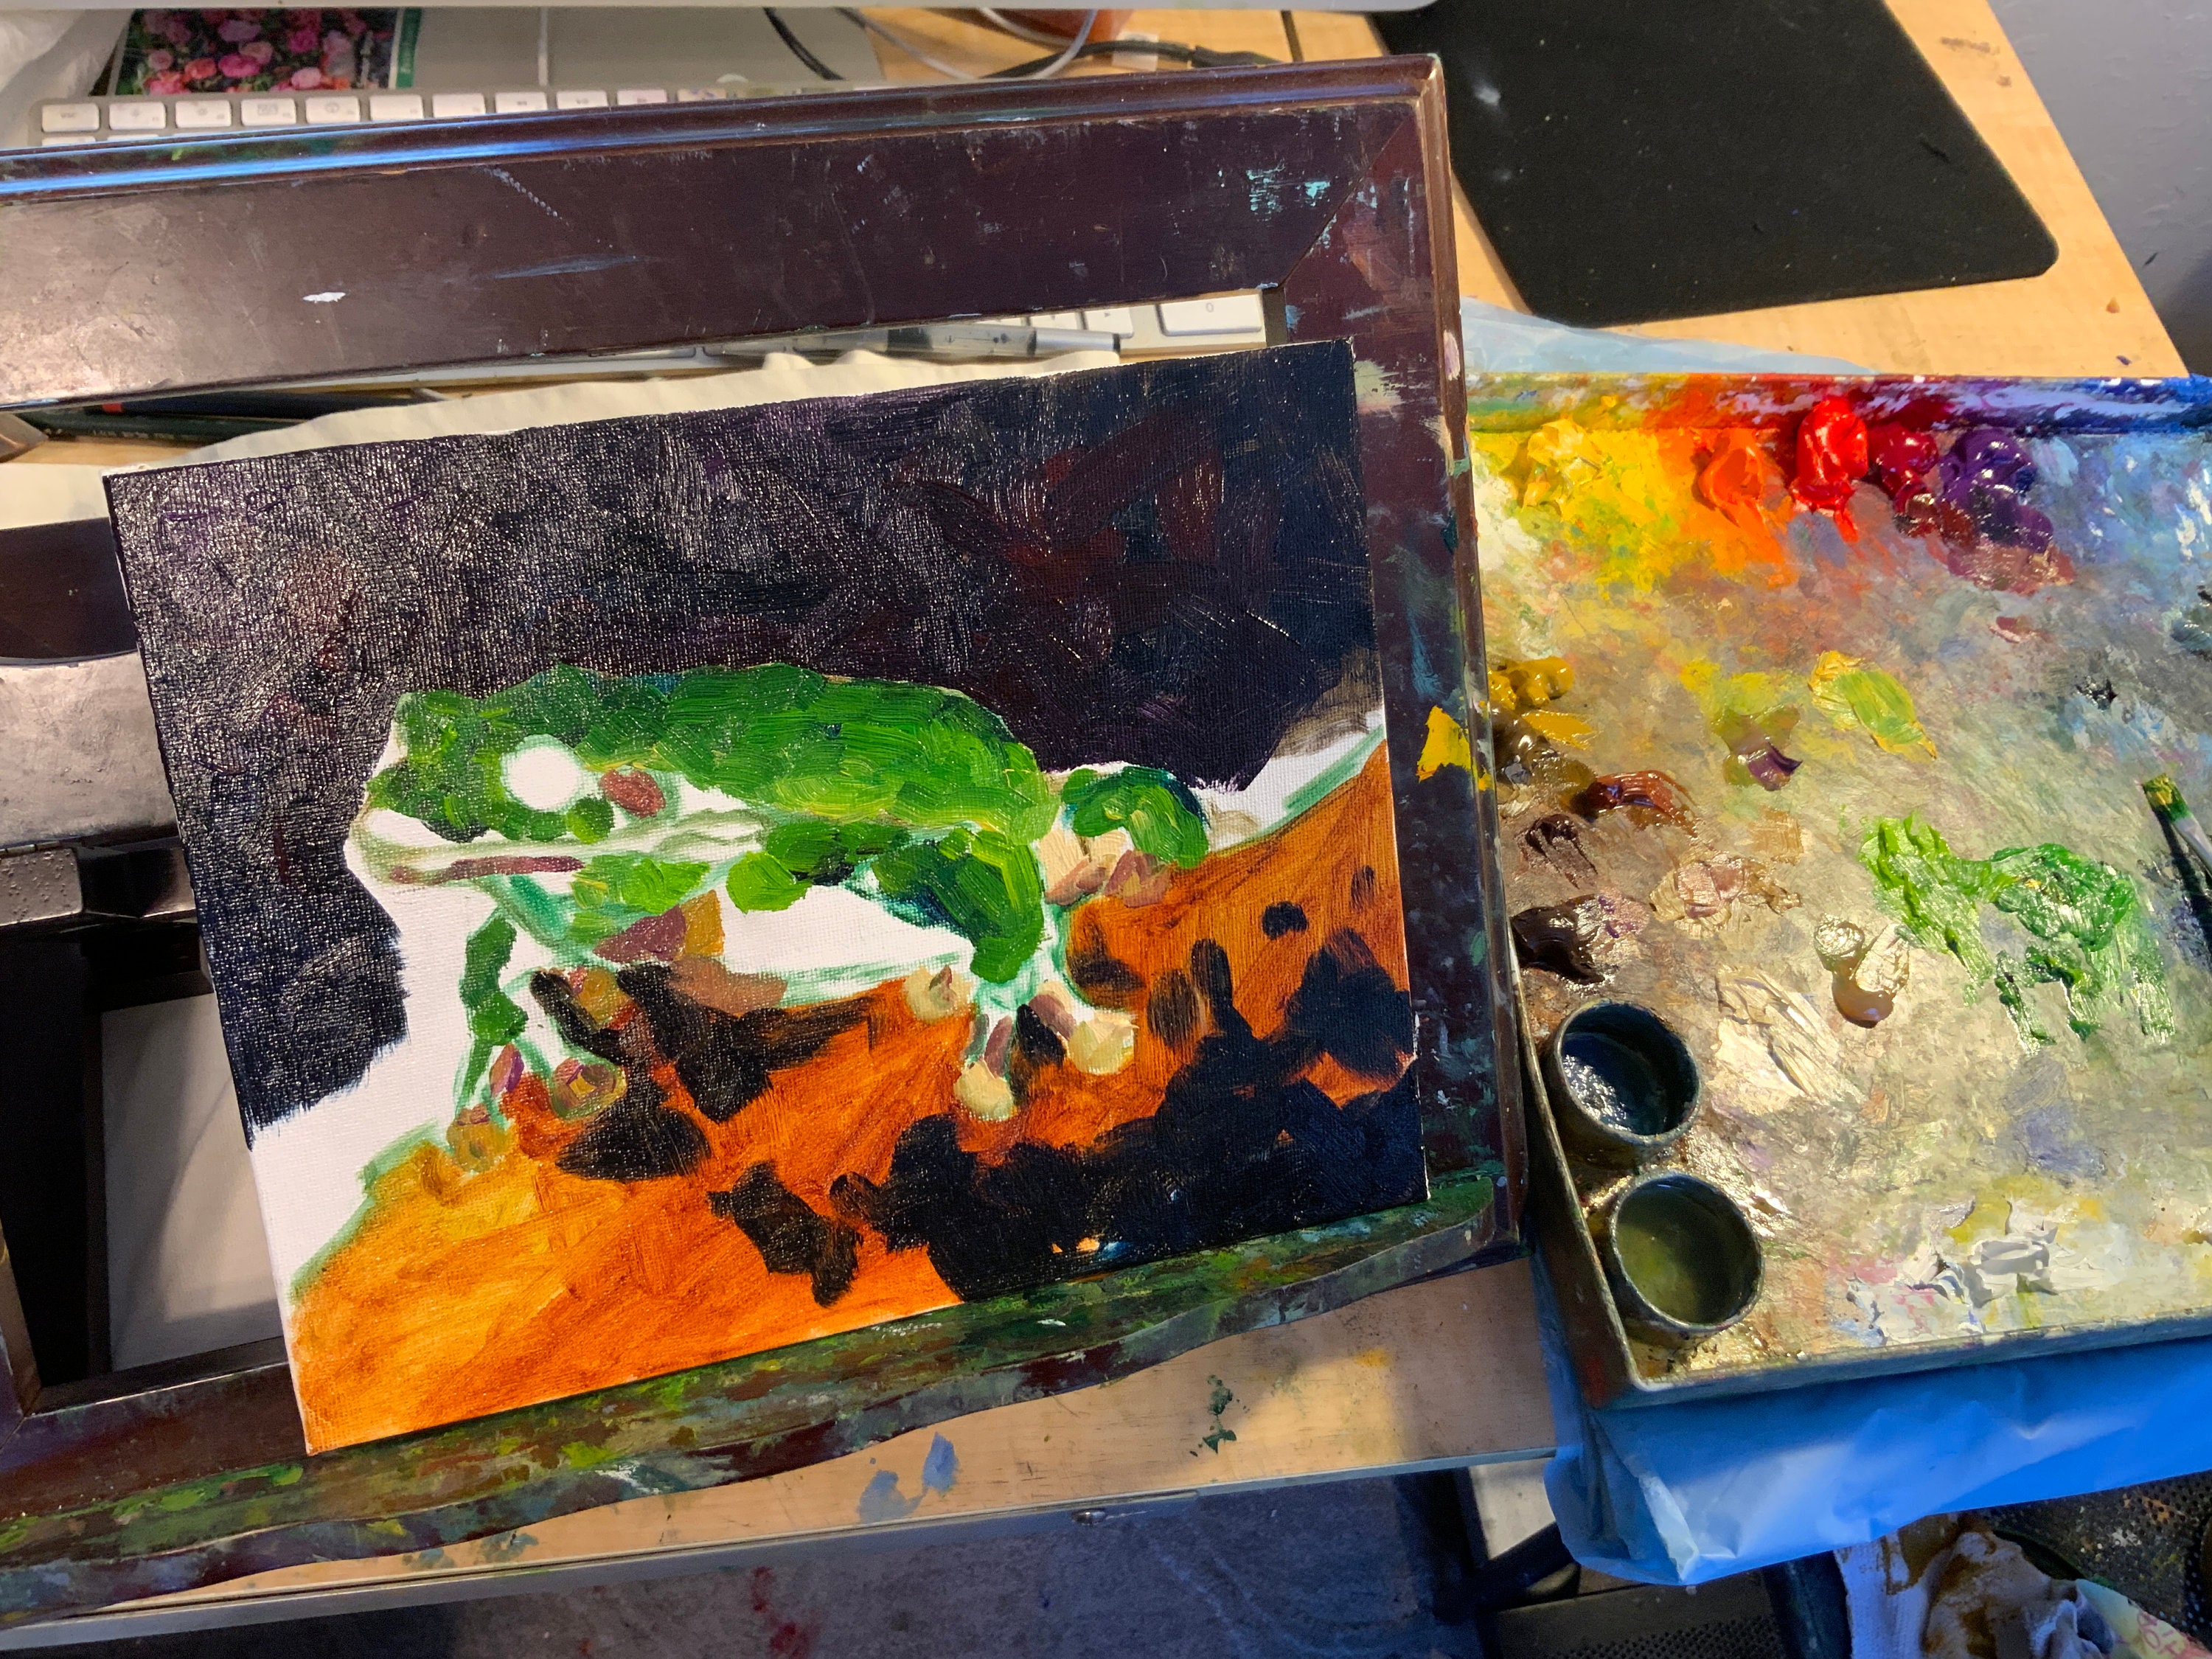 155) Acrylic pouring different techniques on 4x4 canvases 